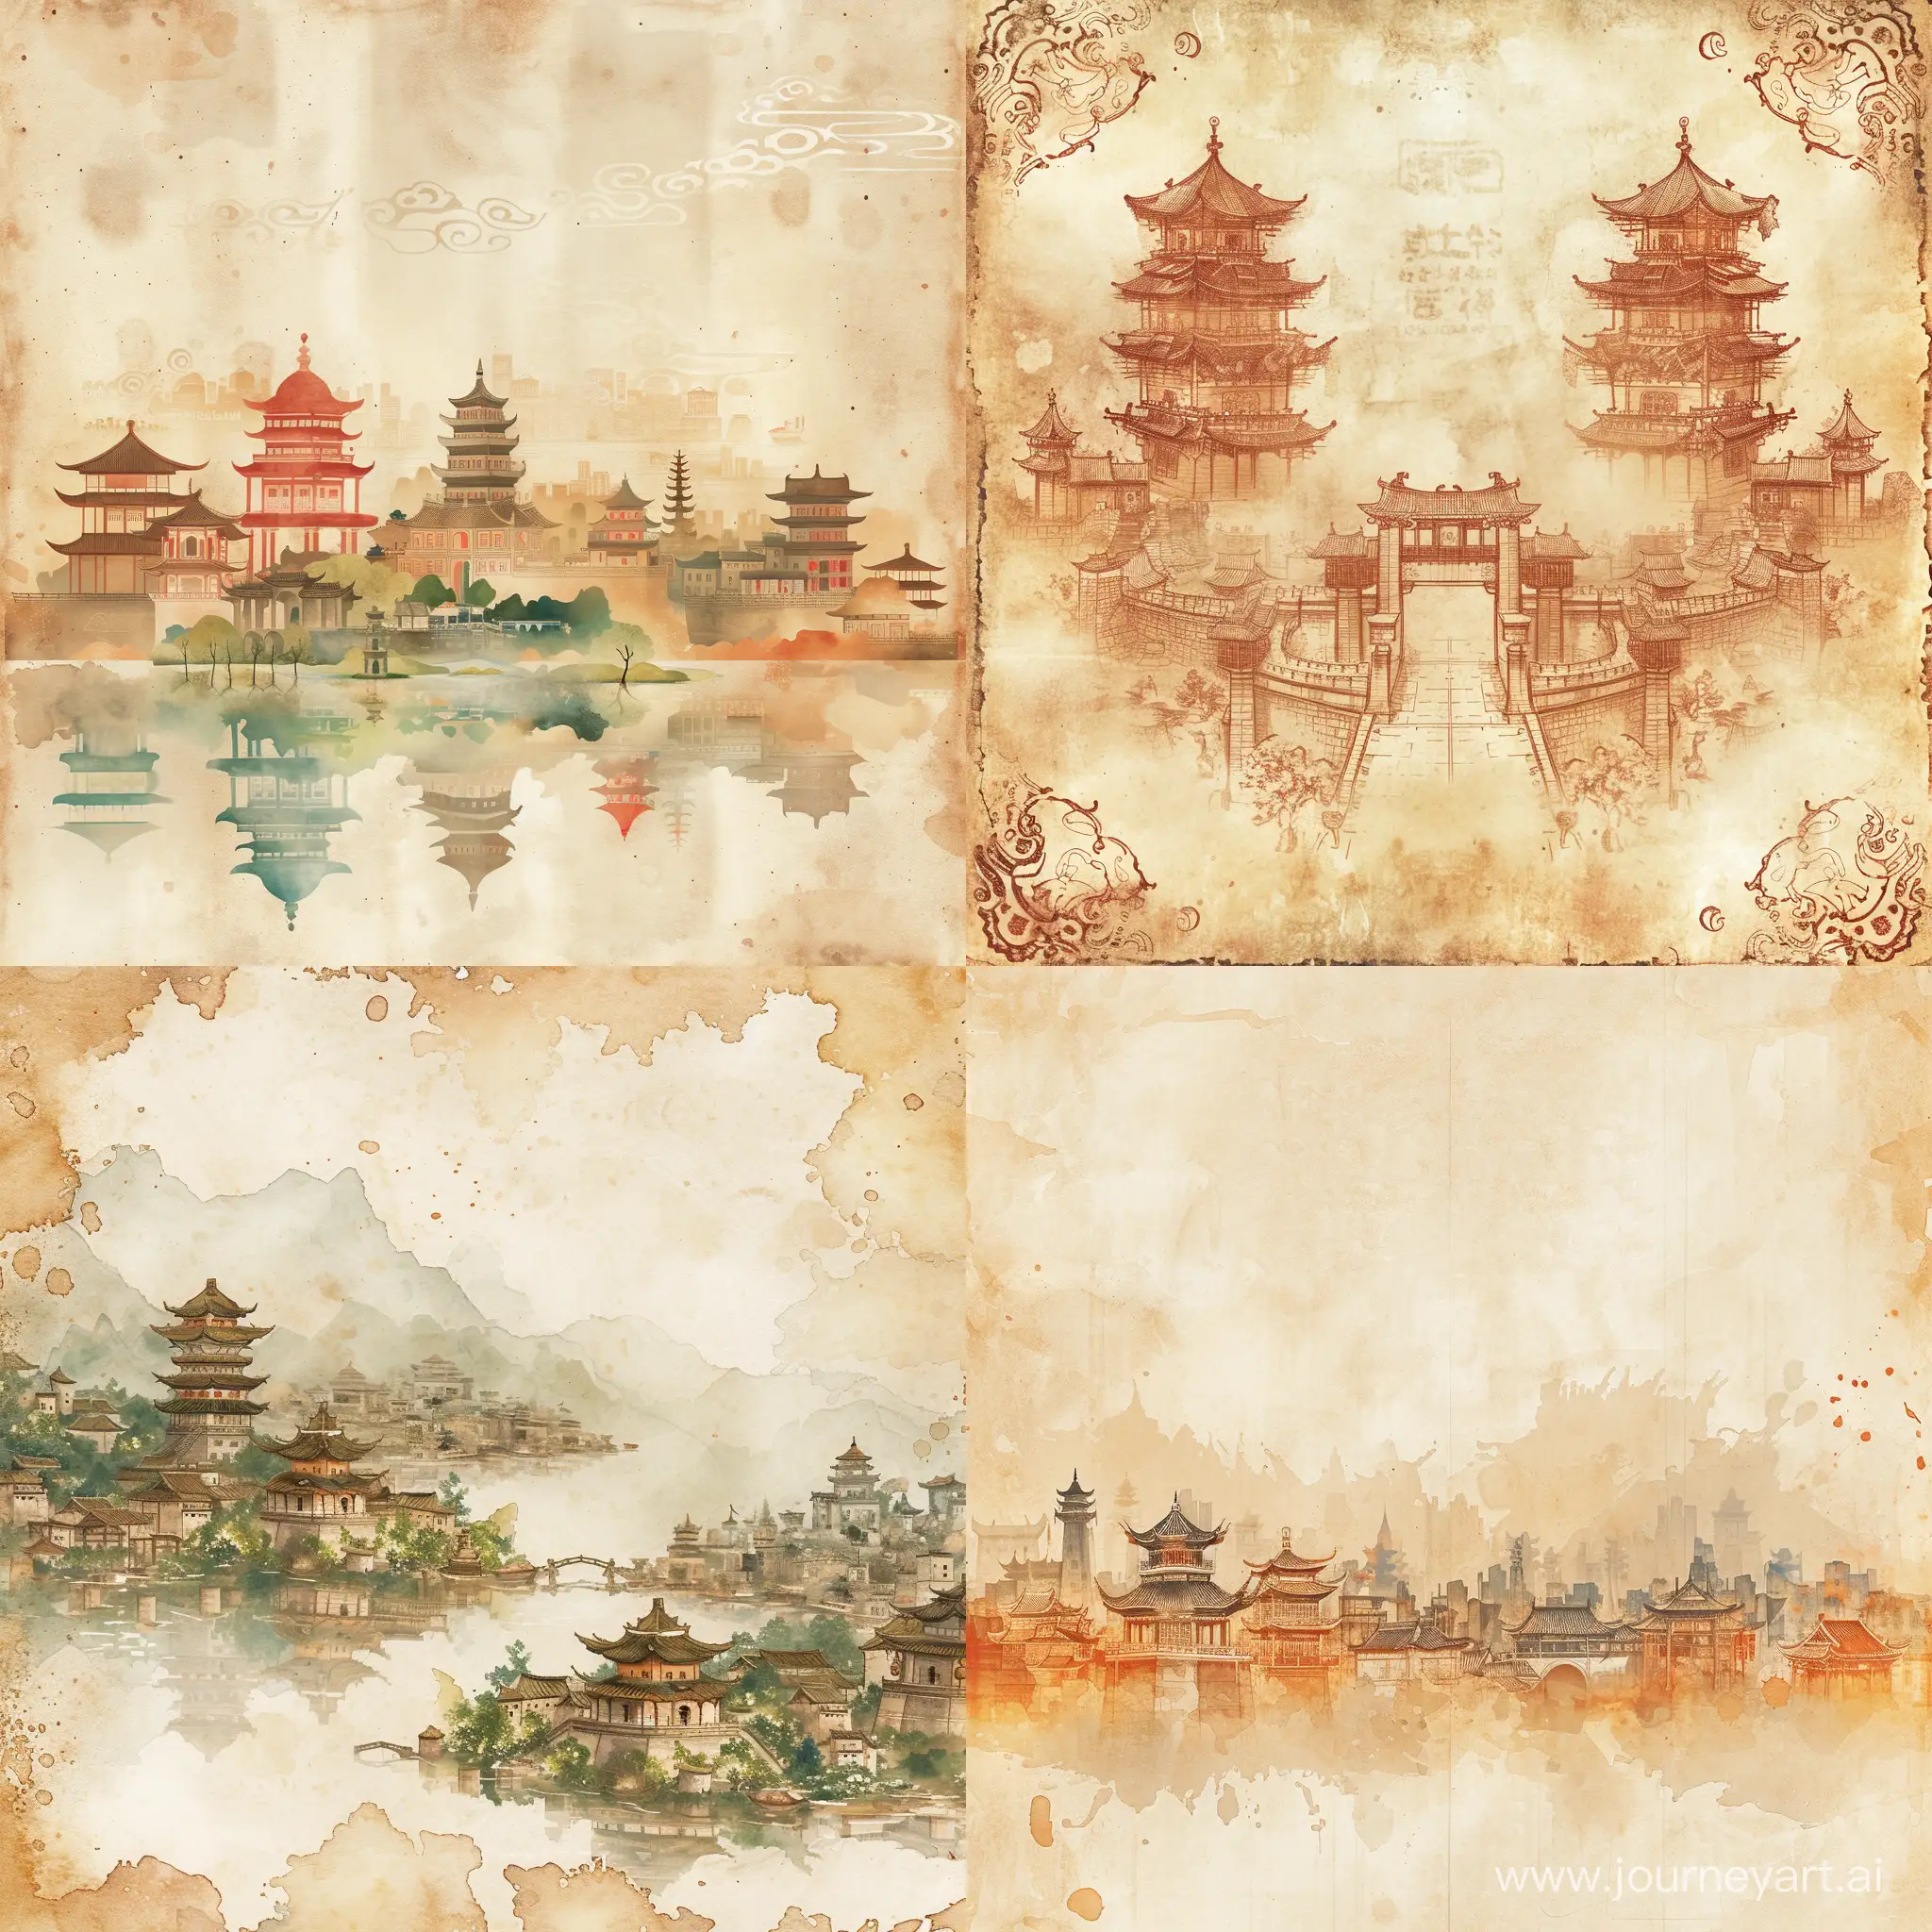 Symmetrical texture of ancient paper, barely noticeable elements of ancient Chinese cities, stylized caricature, watercolor, light colors, decorative, flat drawing